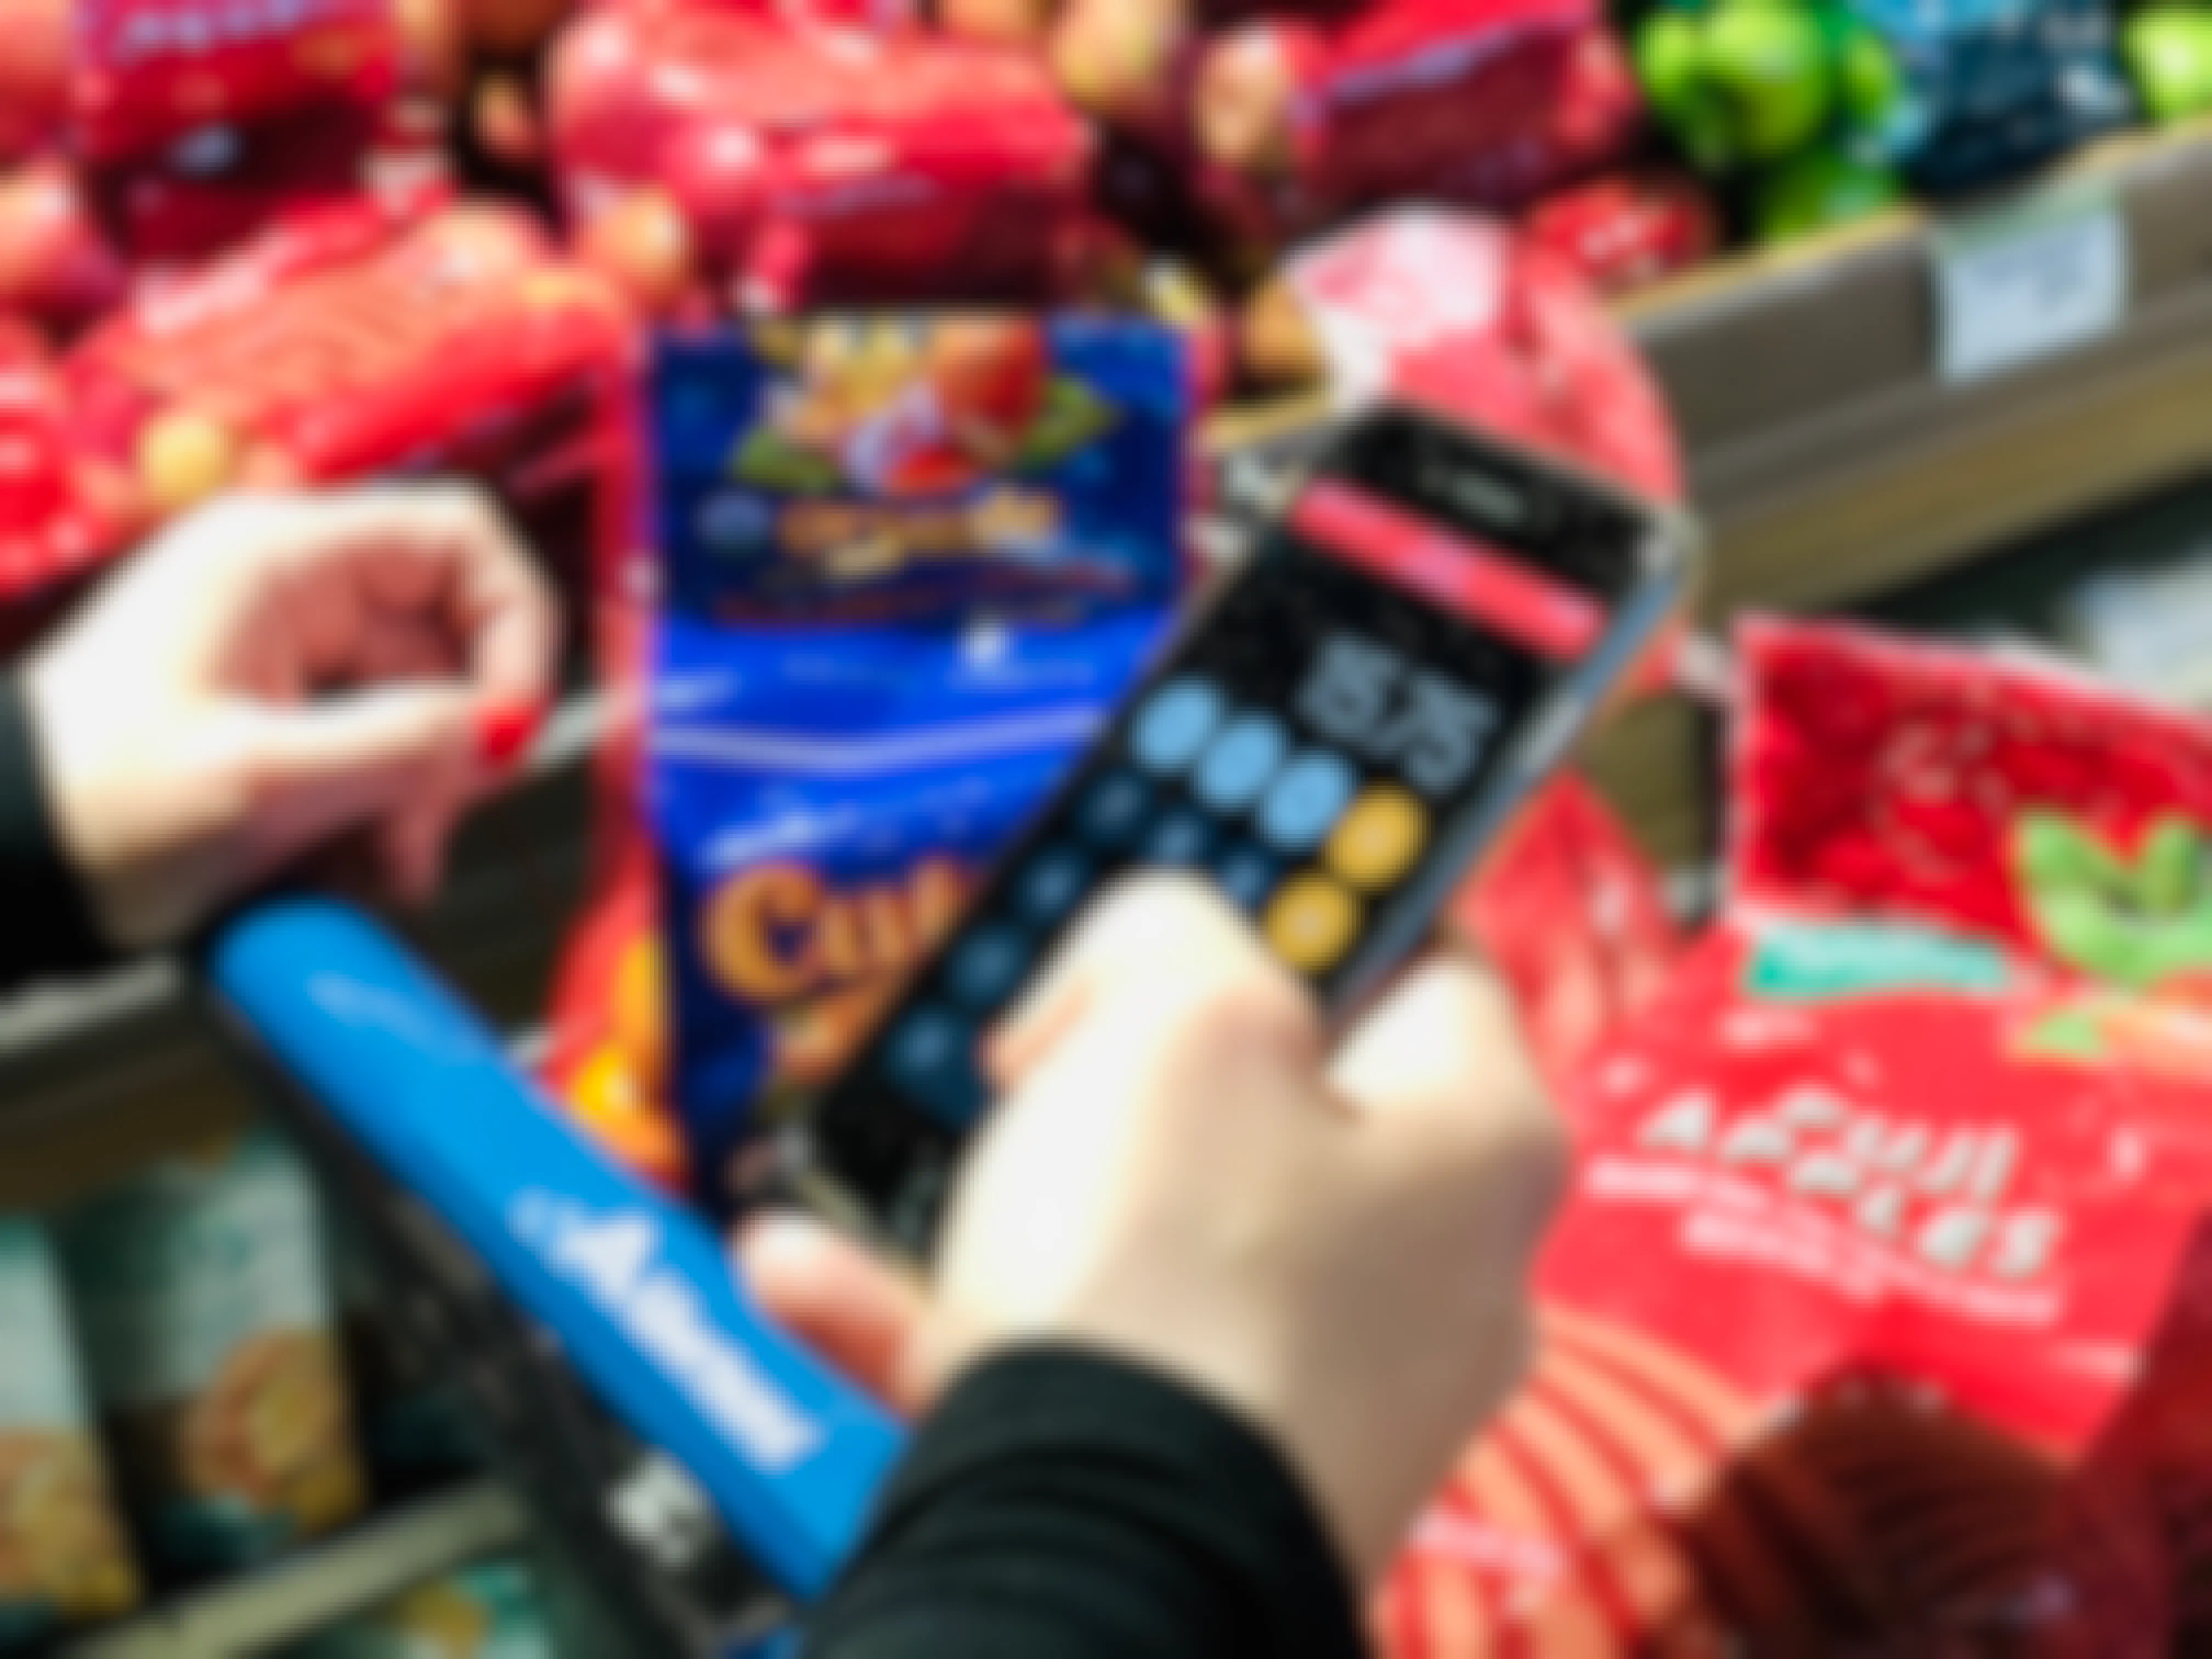 Use your phone as a calculator at the grocery store to keep a running total.